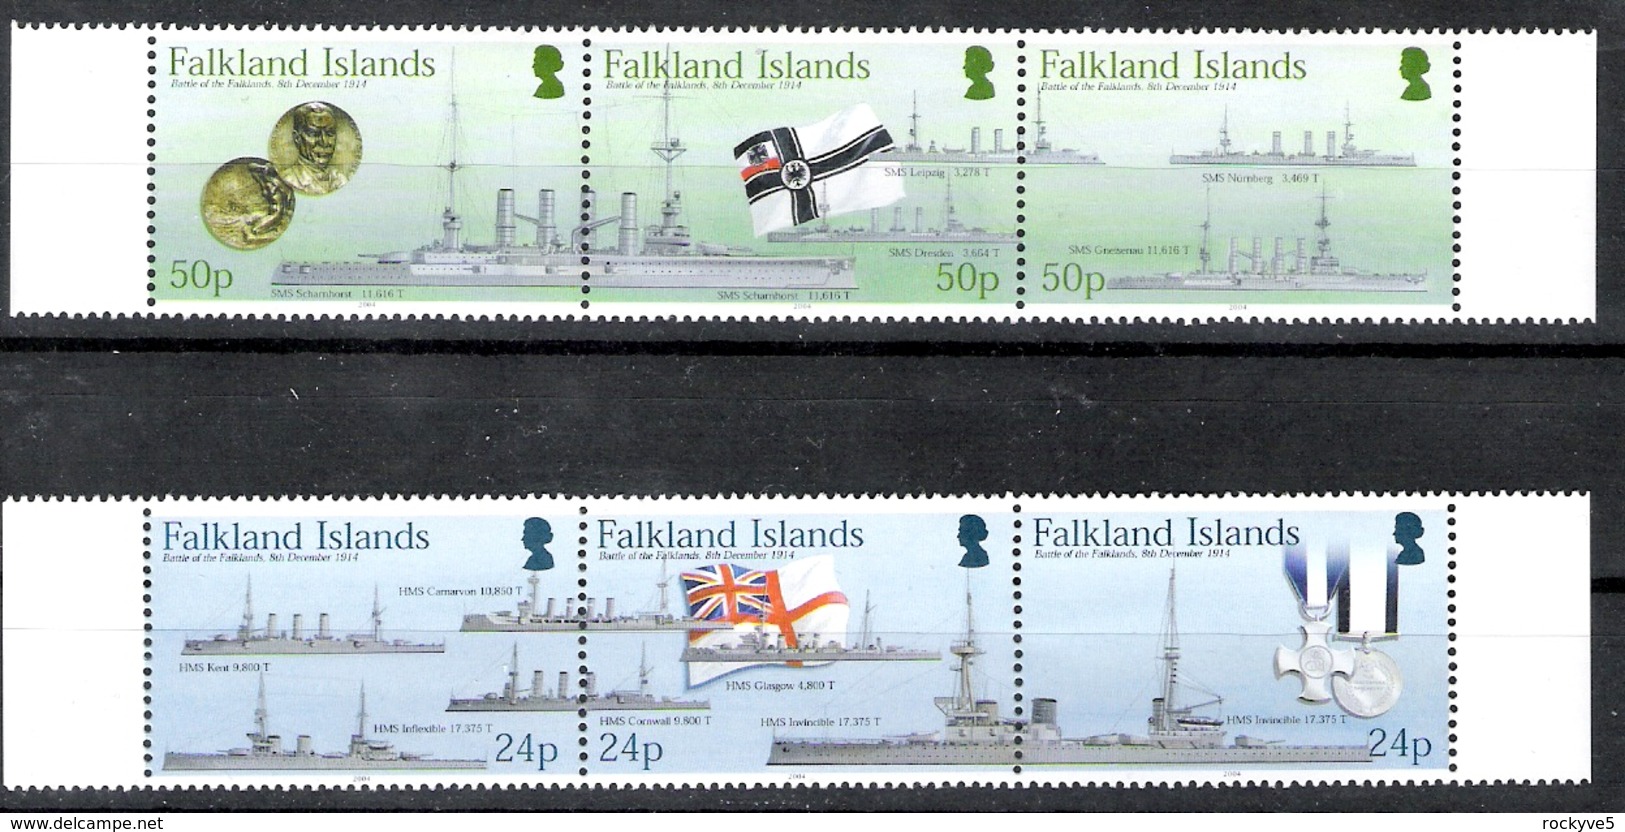 Falkland Islands 2004 90th Anniv Of The Battle Of The Falklands MNH CV £22.00 - Falkland Islands